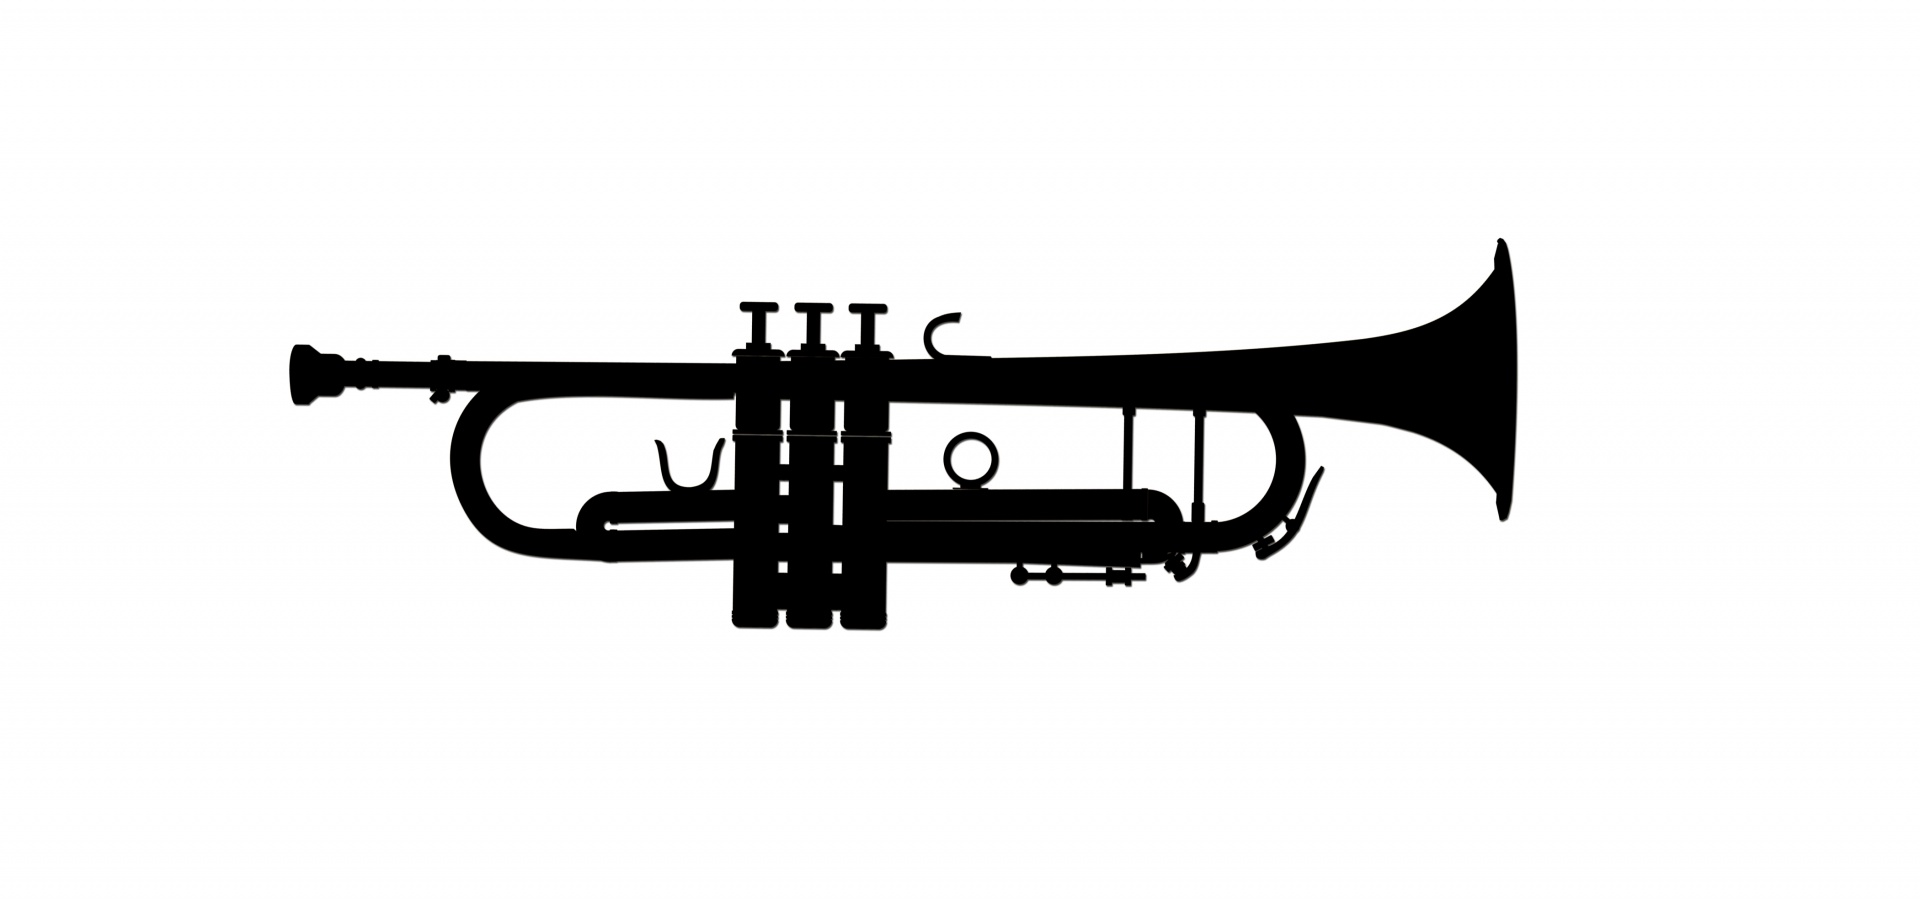 Trumpet clipart. Silhouette free stock photo